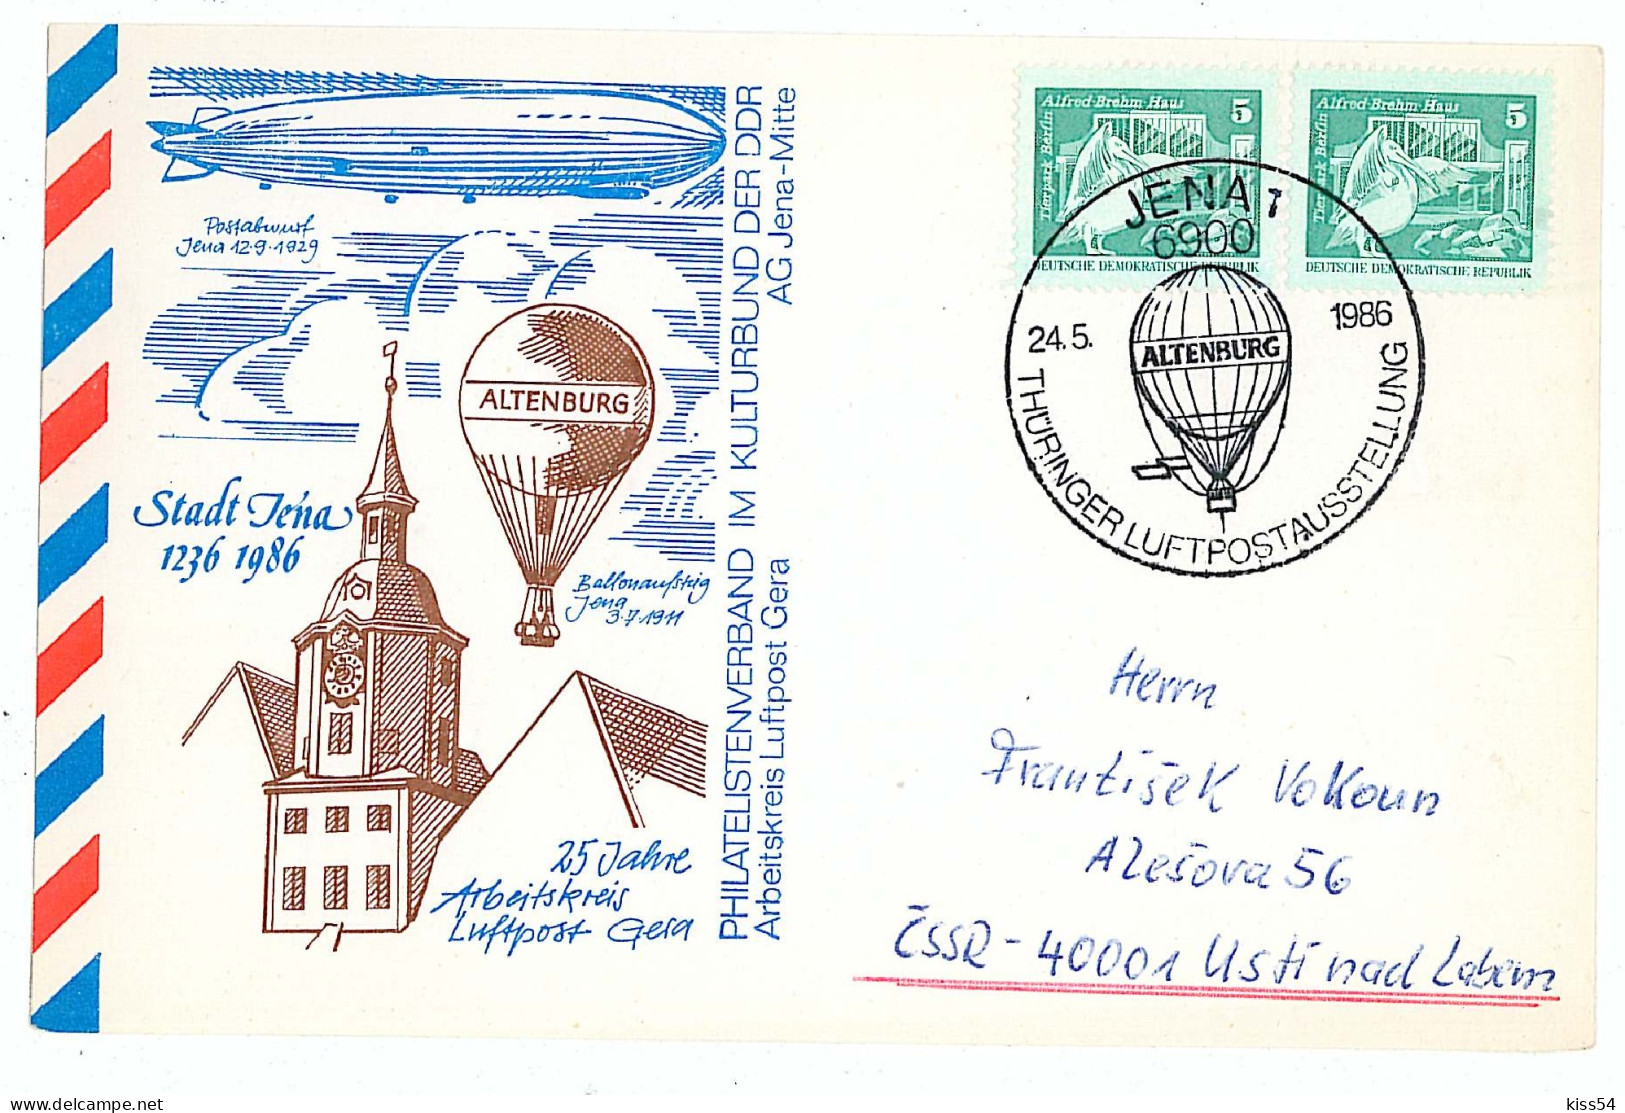 COV 58 - 93 BALLOON, Germany - Cover - Used - 1986 - Sonstige (Luft)